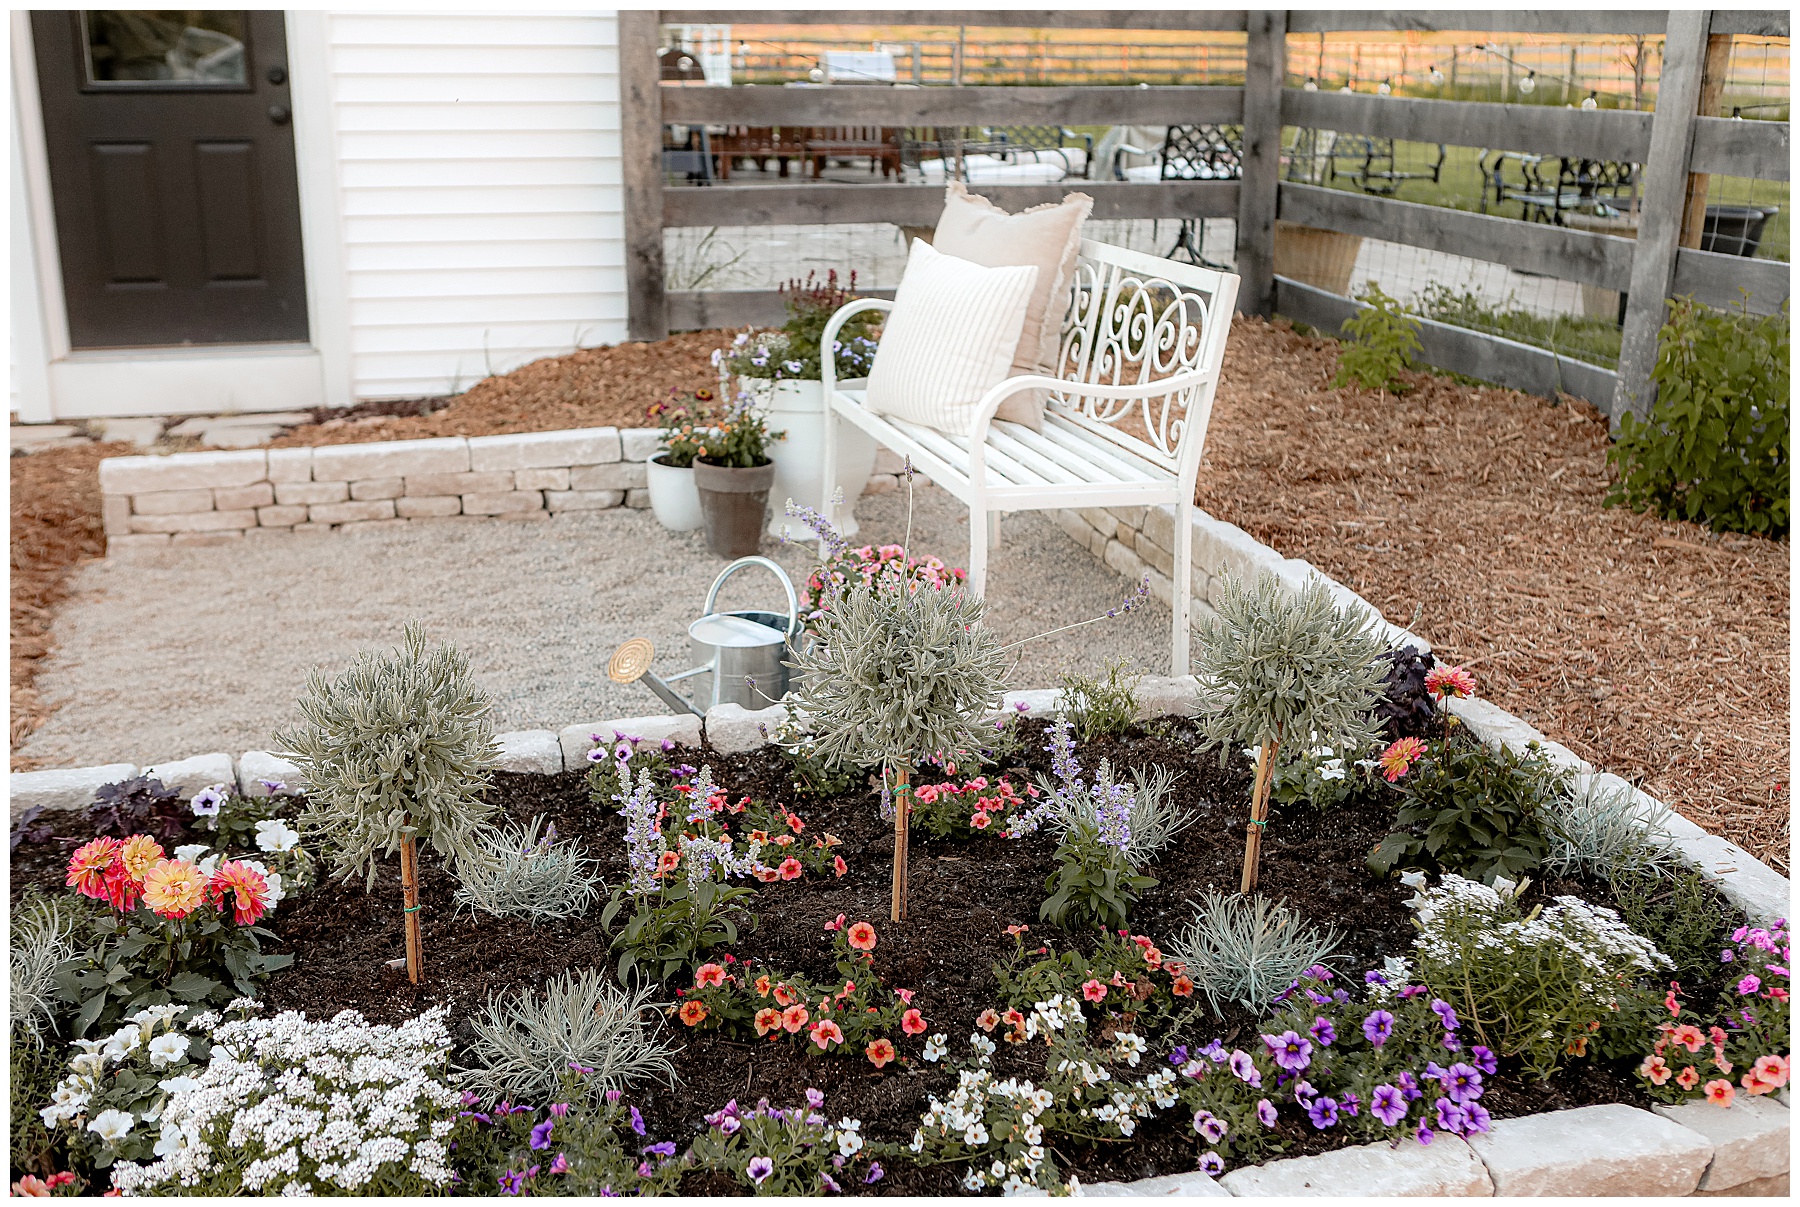 How to build a stone garden bed